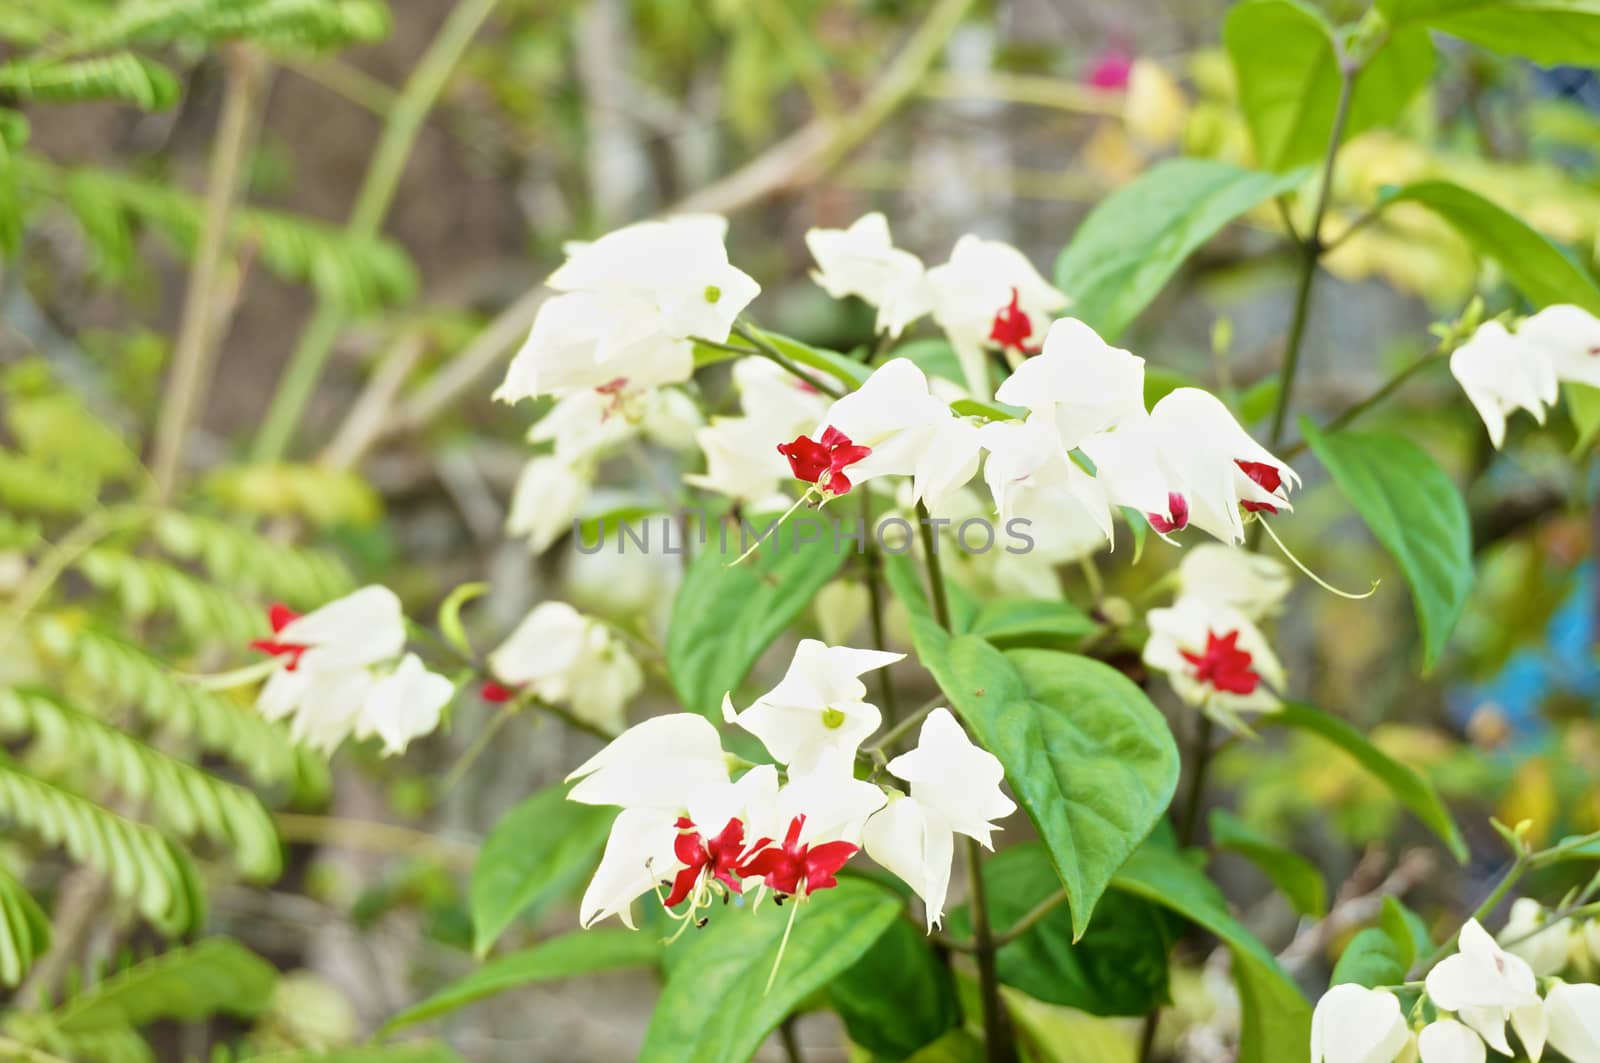 Clerodendrum thomsoniae is small white and red flower in Thailand.